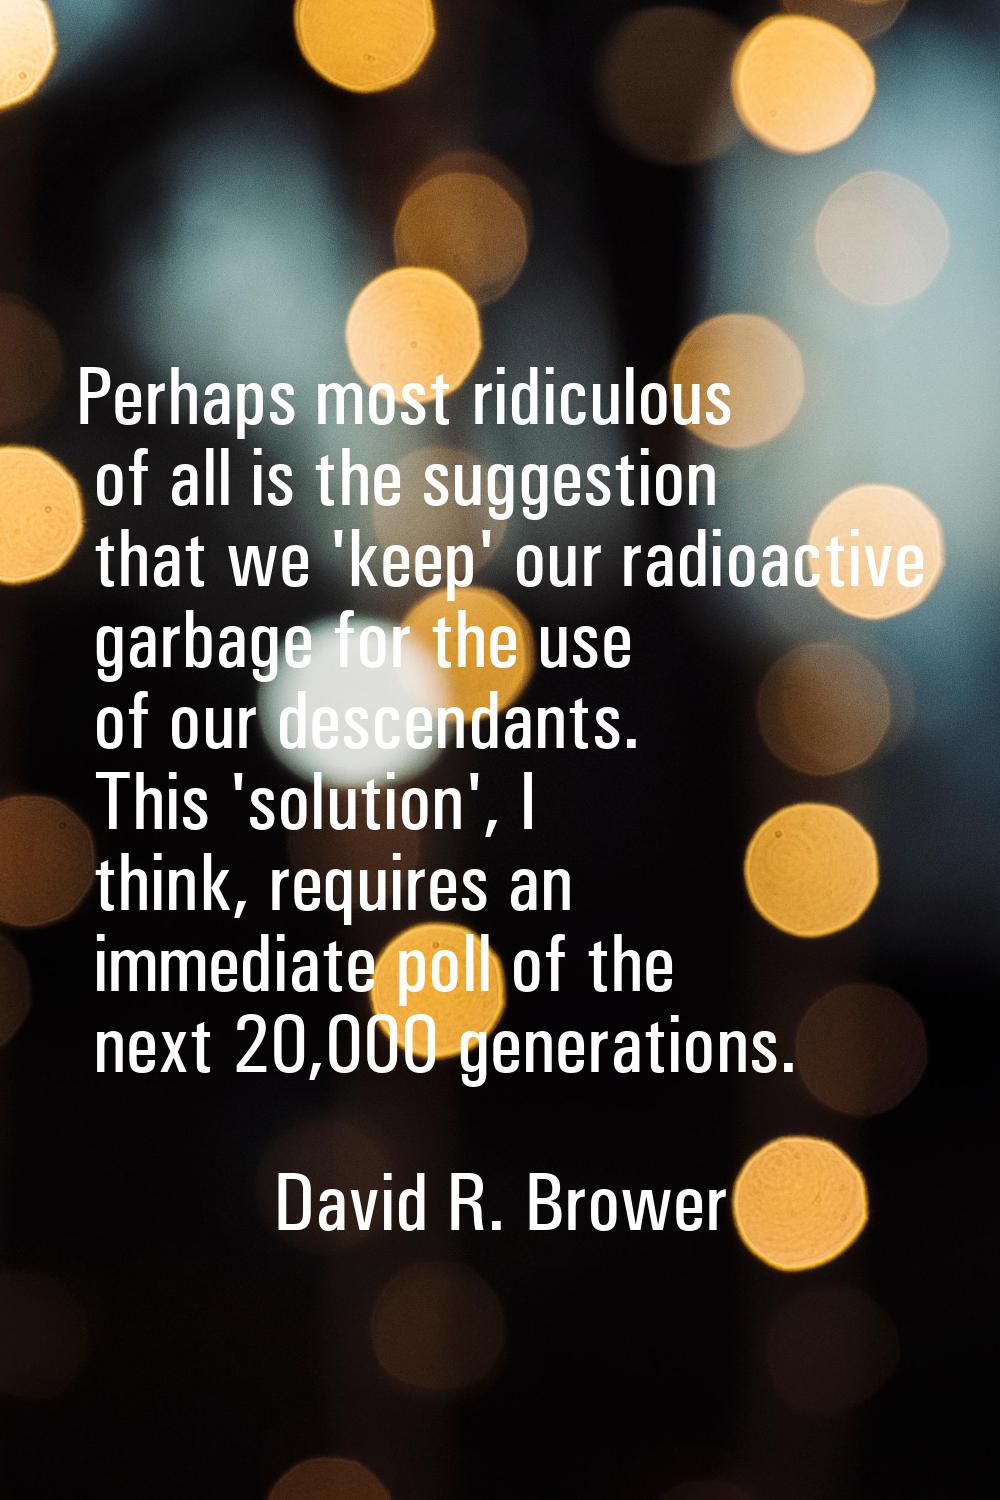 Perhaps most ridiculous of all is the suggestion that we 'keep' our radioactive garbage for the use